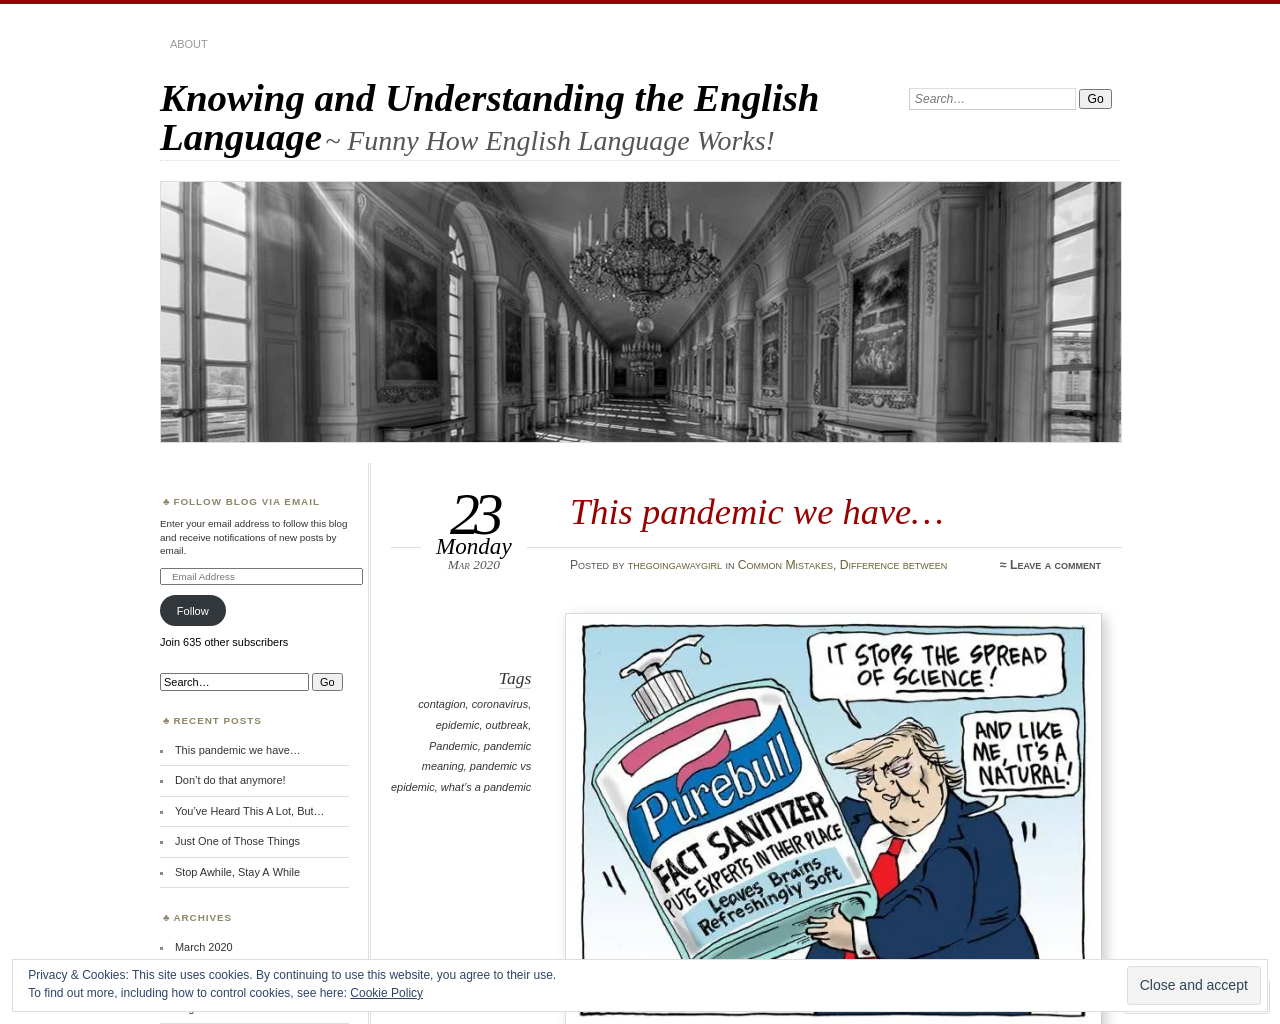 Knowing and Understanding the English Language